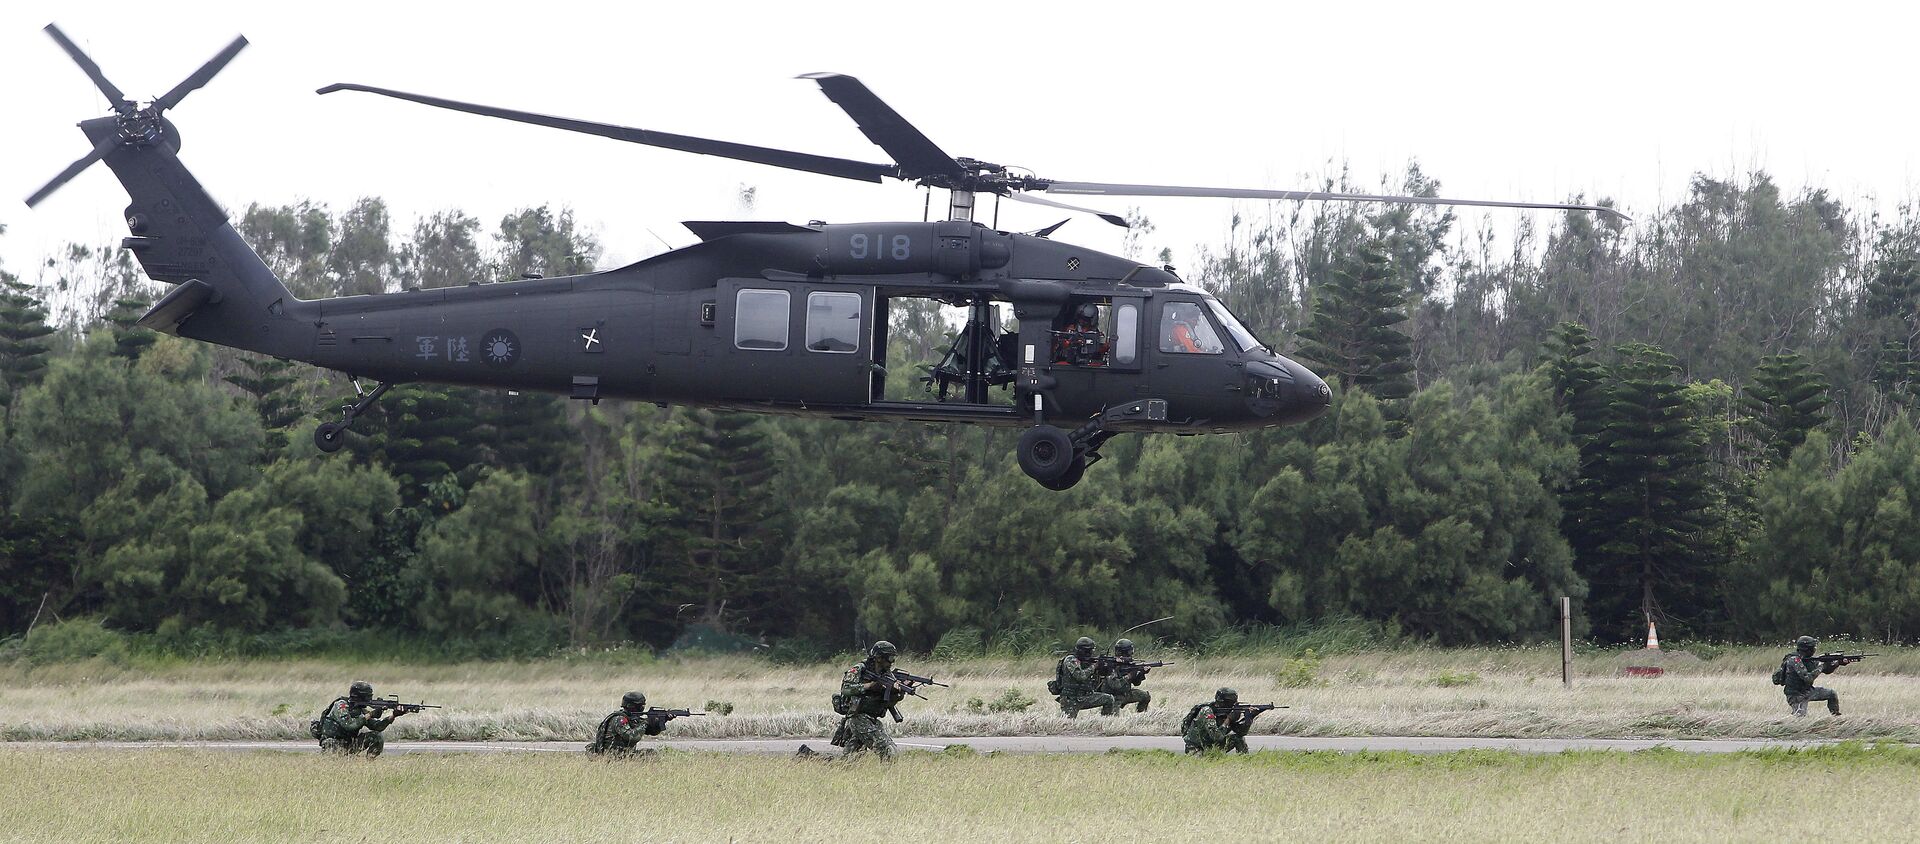 Soldiers from Taiwan's special forces exit from a UH-60 Black Hawk helicopter during the annual Han Kuang exercises on the outlying Penghu Island, Taiwan, Thursday, May 25, 2017 - Sputnik International, 1920, 17.08.2021